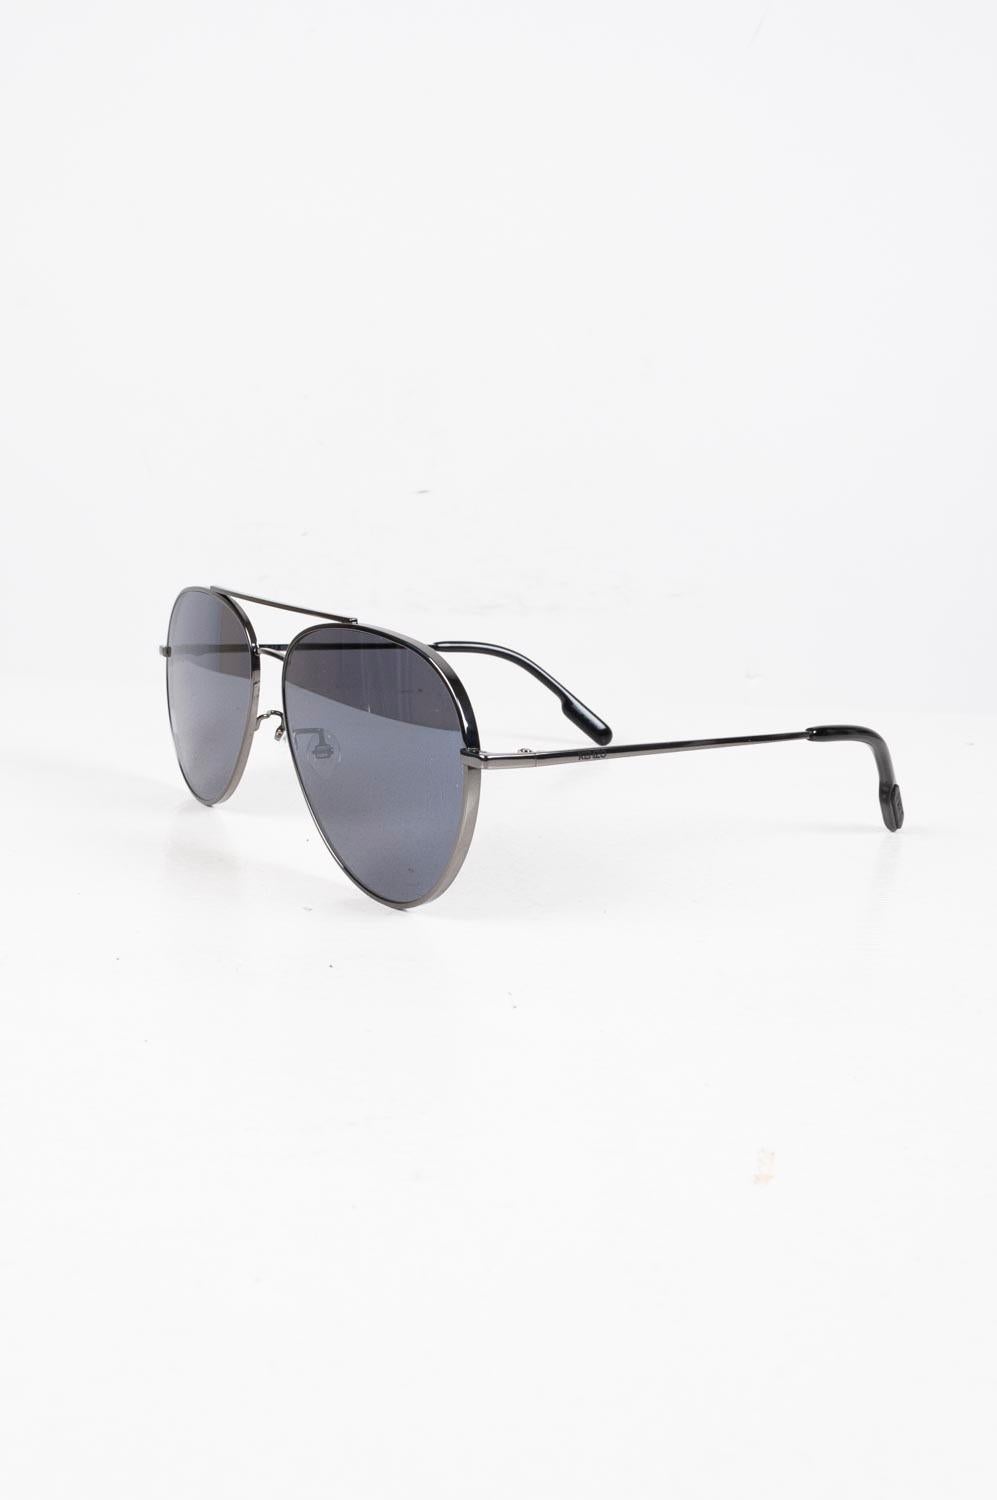 Item for sale is 100% genuine Kenzo KZ40085F Men Sunglasses, S324
Color: Grey
(An actual color may a bit vary due to individual computer screen interpretation)
Material: Glass/metal
Tag size: One Size
These sunglasses is great quality item. Rate 10